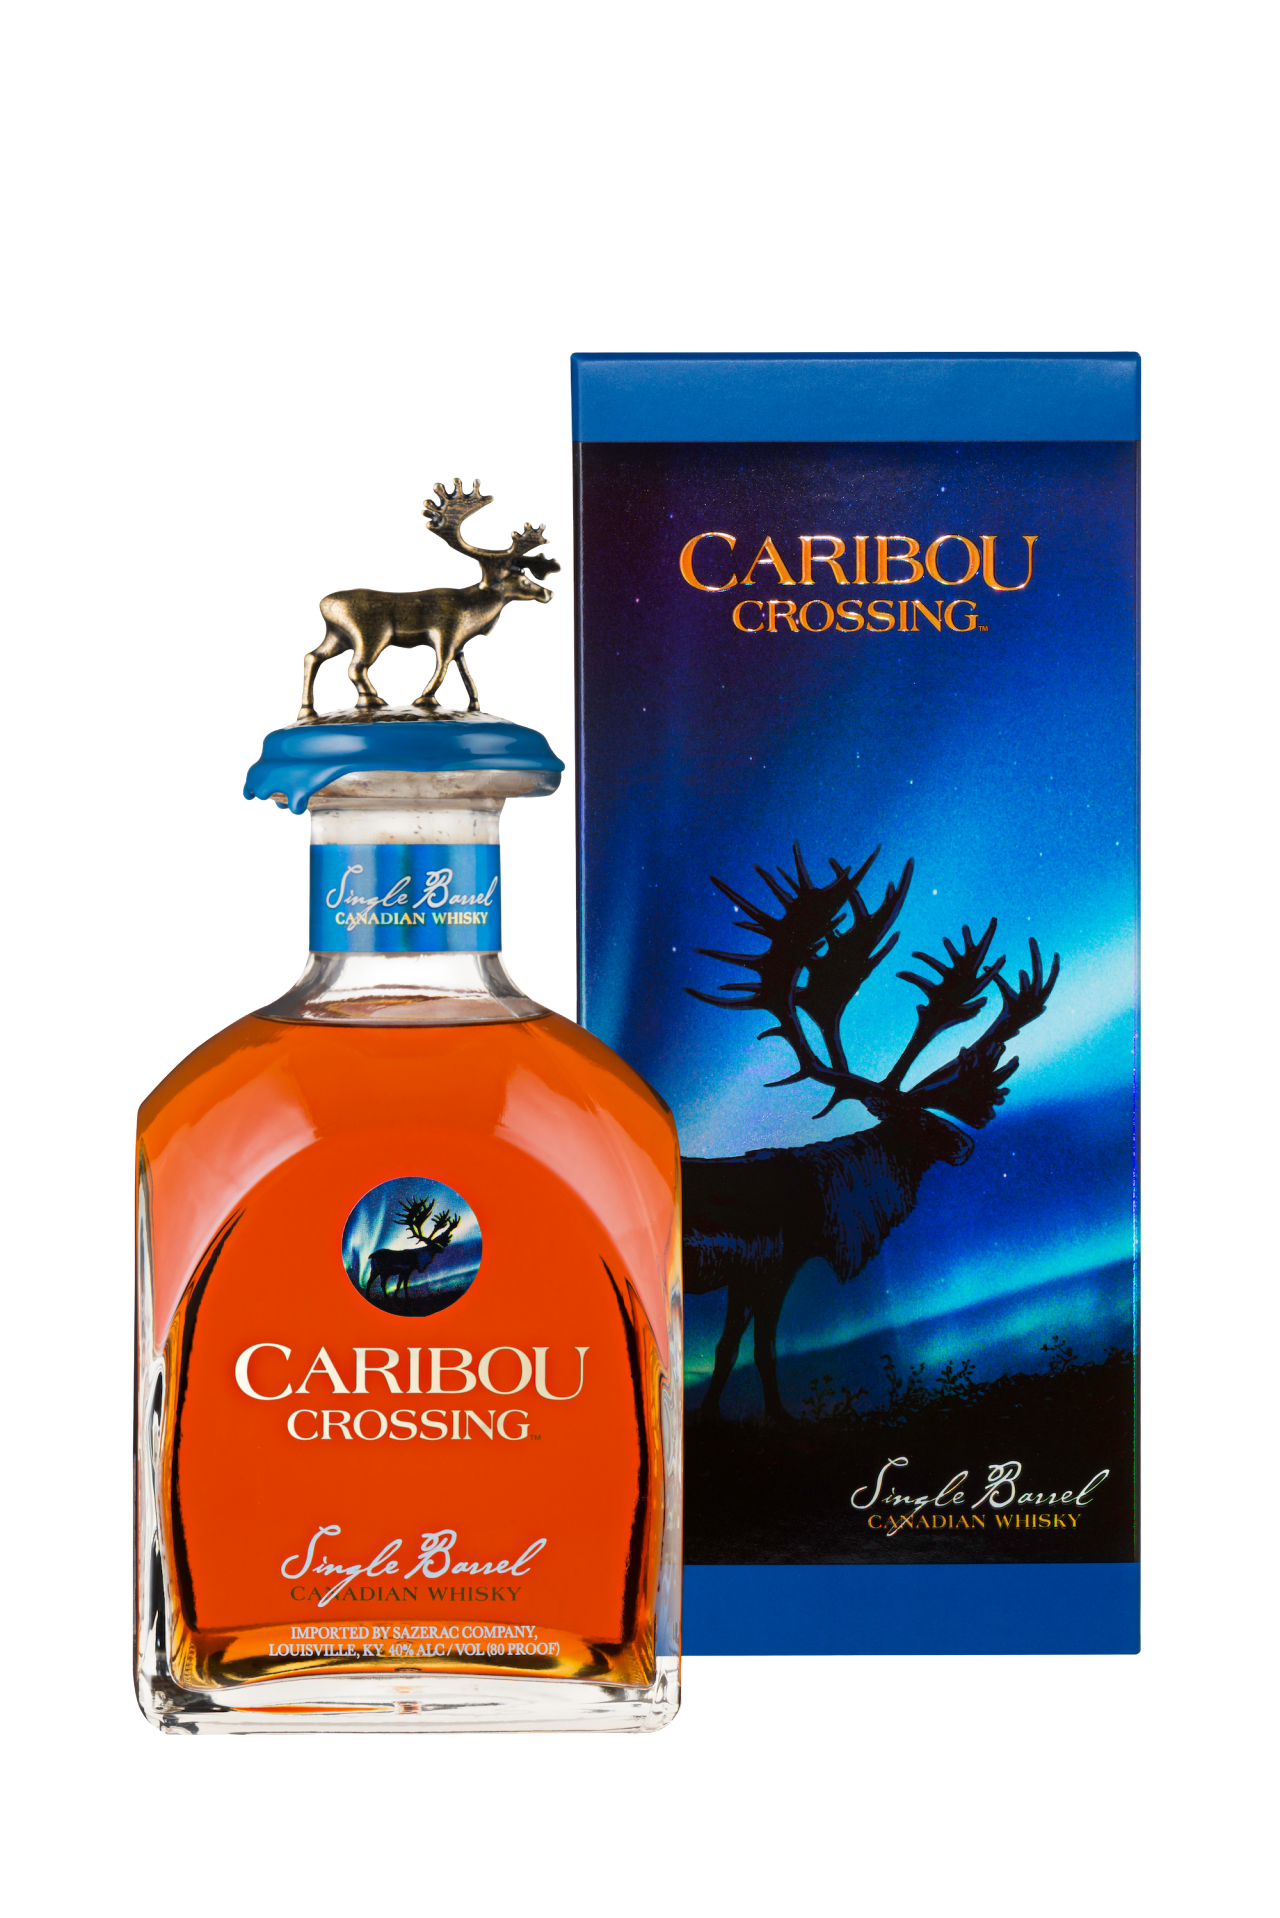 Caribou Crossing bottle with blue box packaging